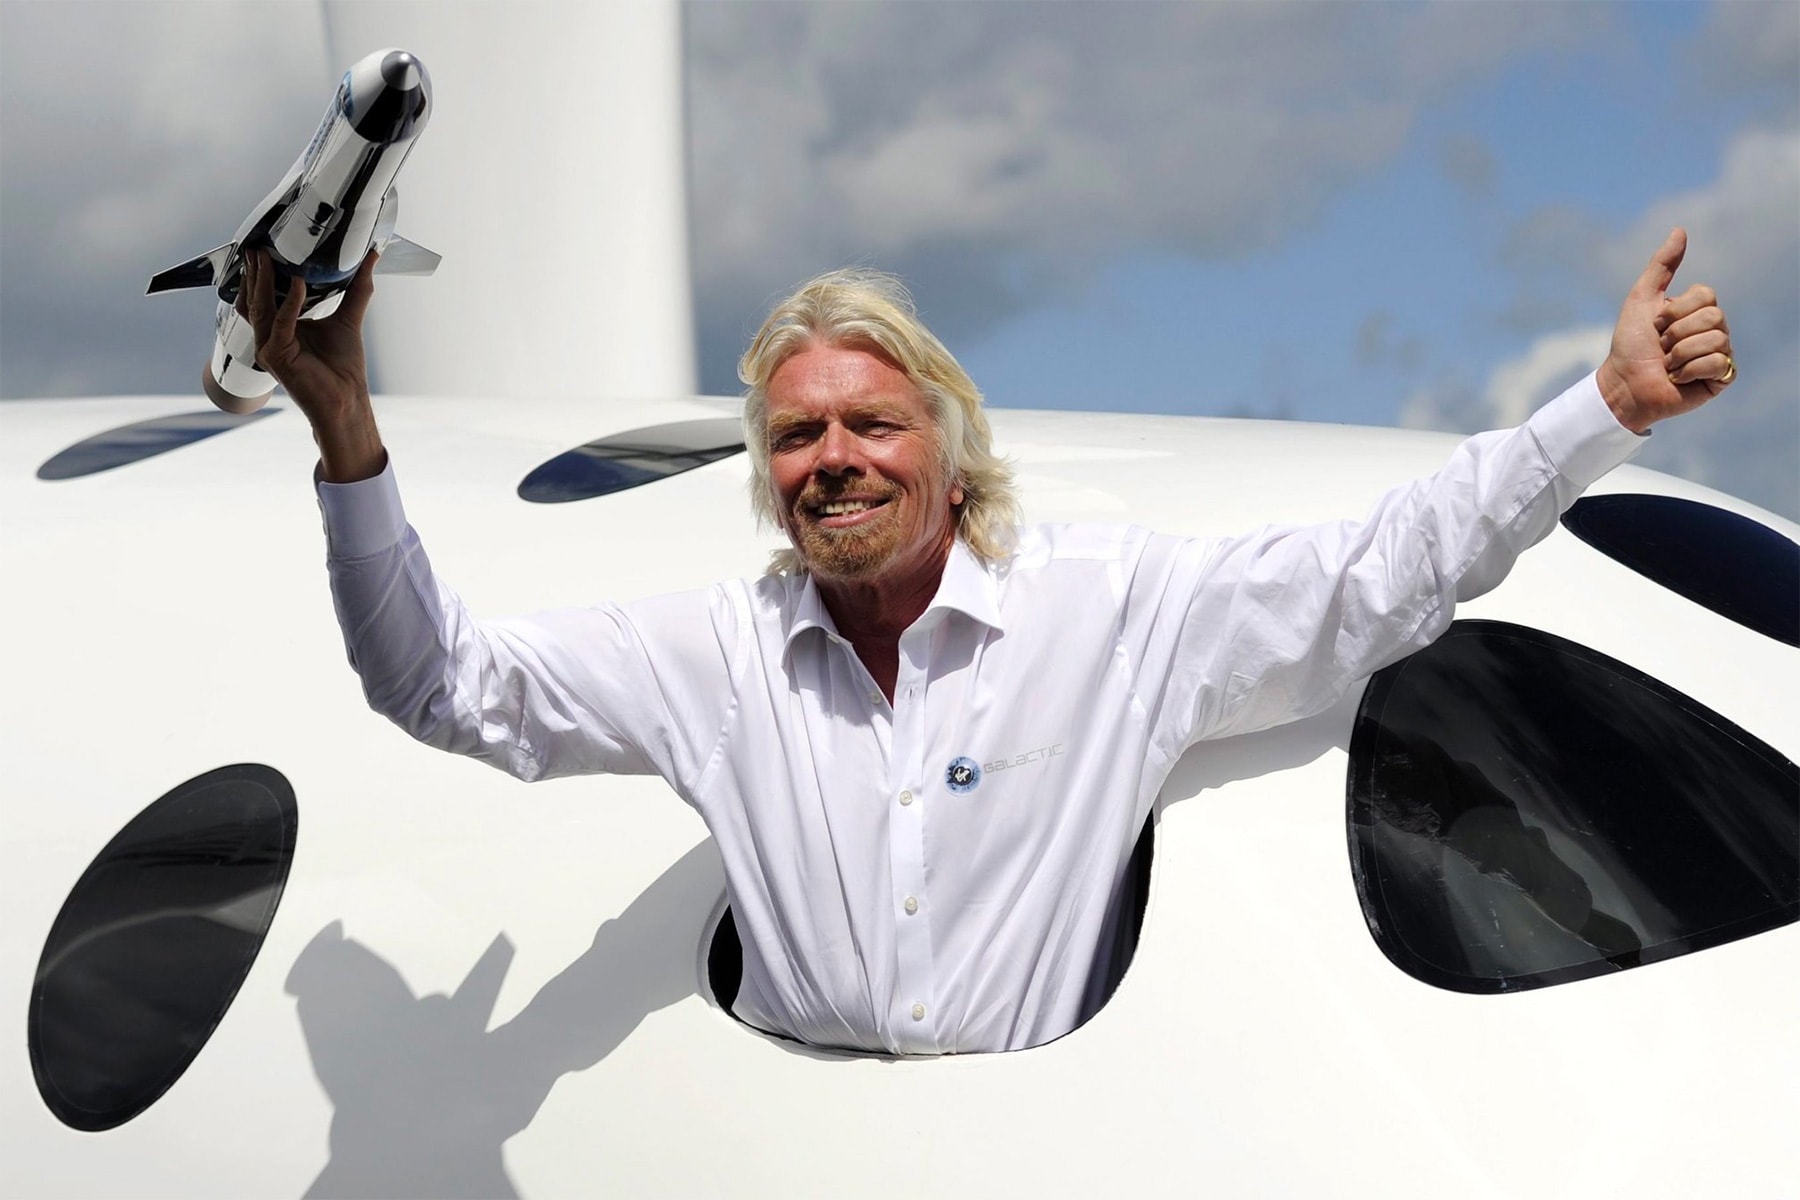 RICHARD BRANSON: How a Canceled Flight Led to the World's Greatest